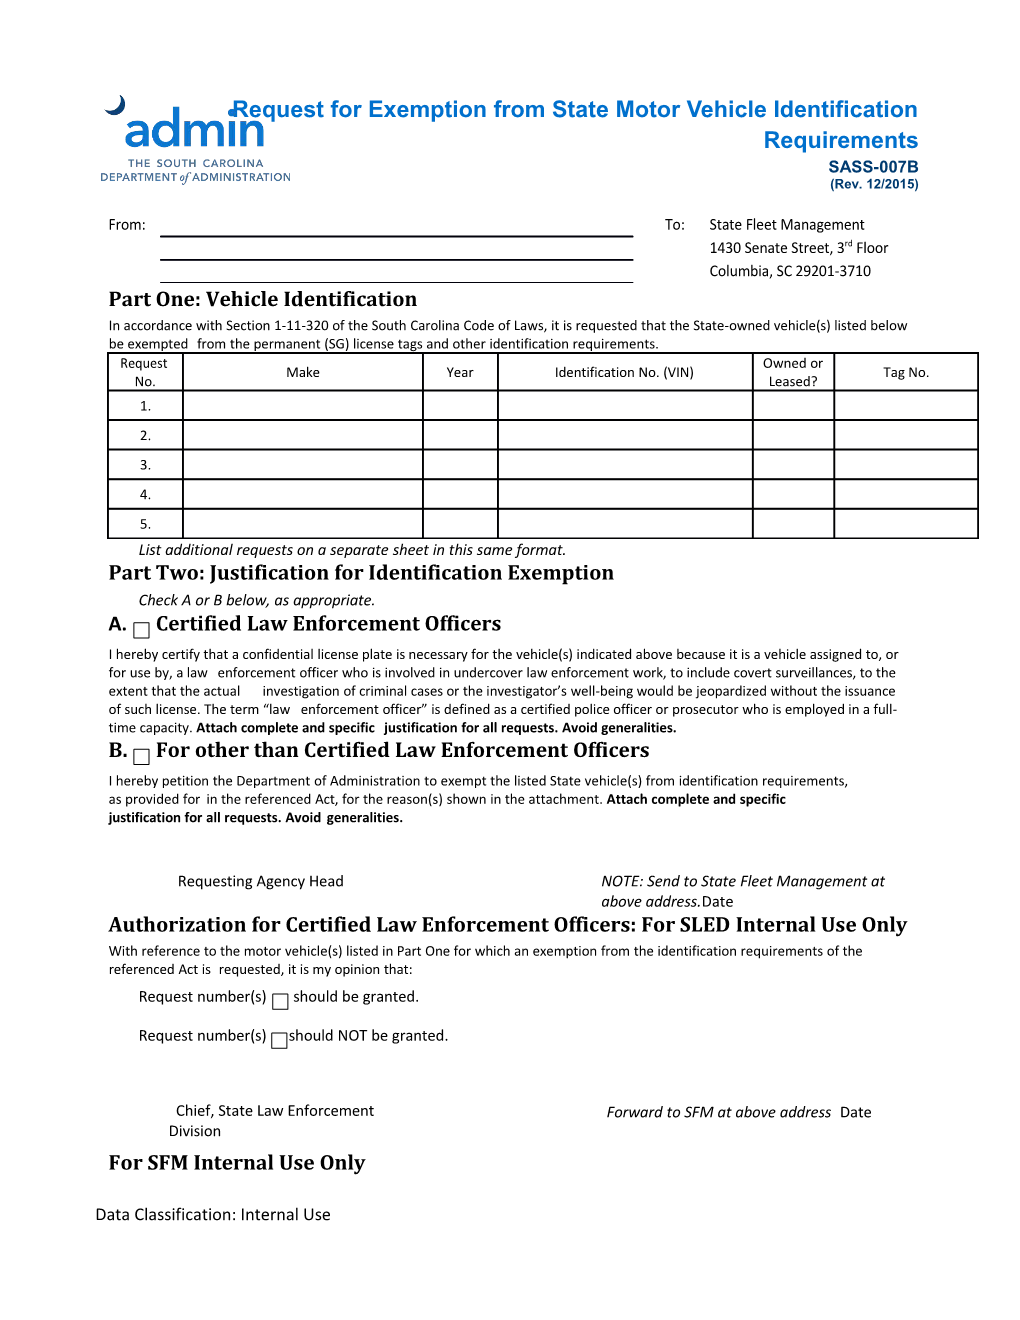 SFM Form 1-79 Revised May 2005